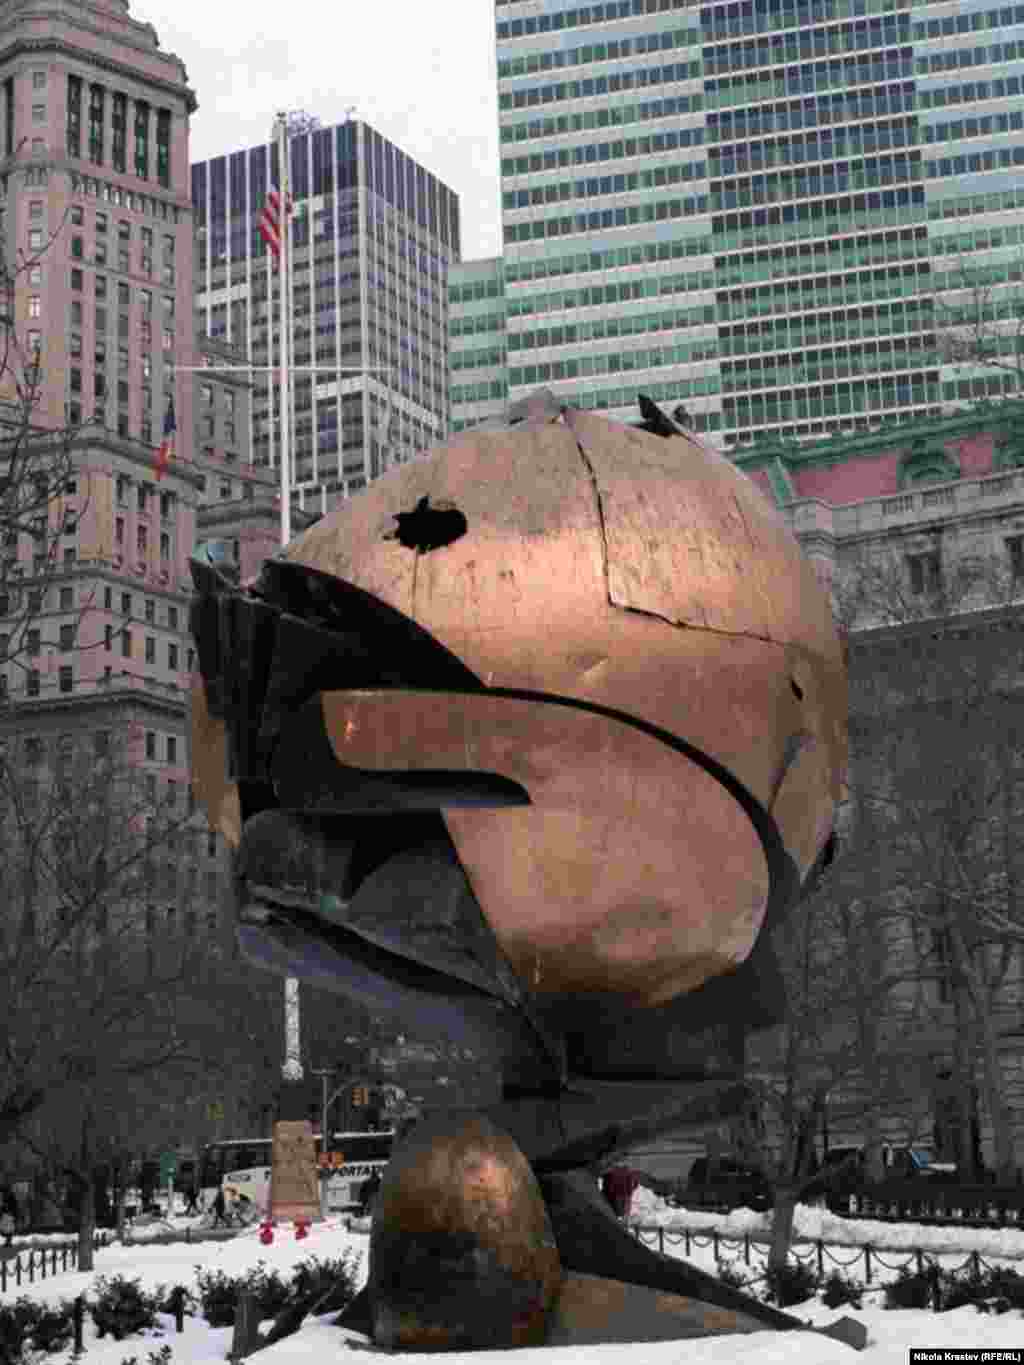 &quot;The Sphere,&quot; by German sculptor Fritz Koenig, stood in the plaza near the Twin Towers. It has been relocated to Battery Park at the southern tip of Manhattan and still shows damage from the fire and debris.